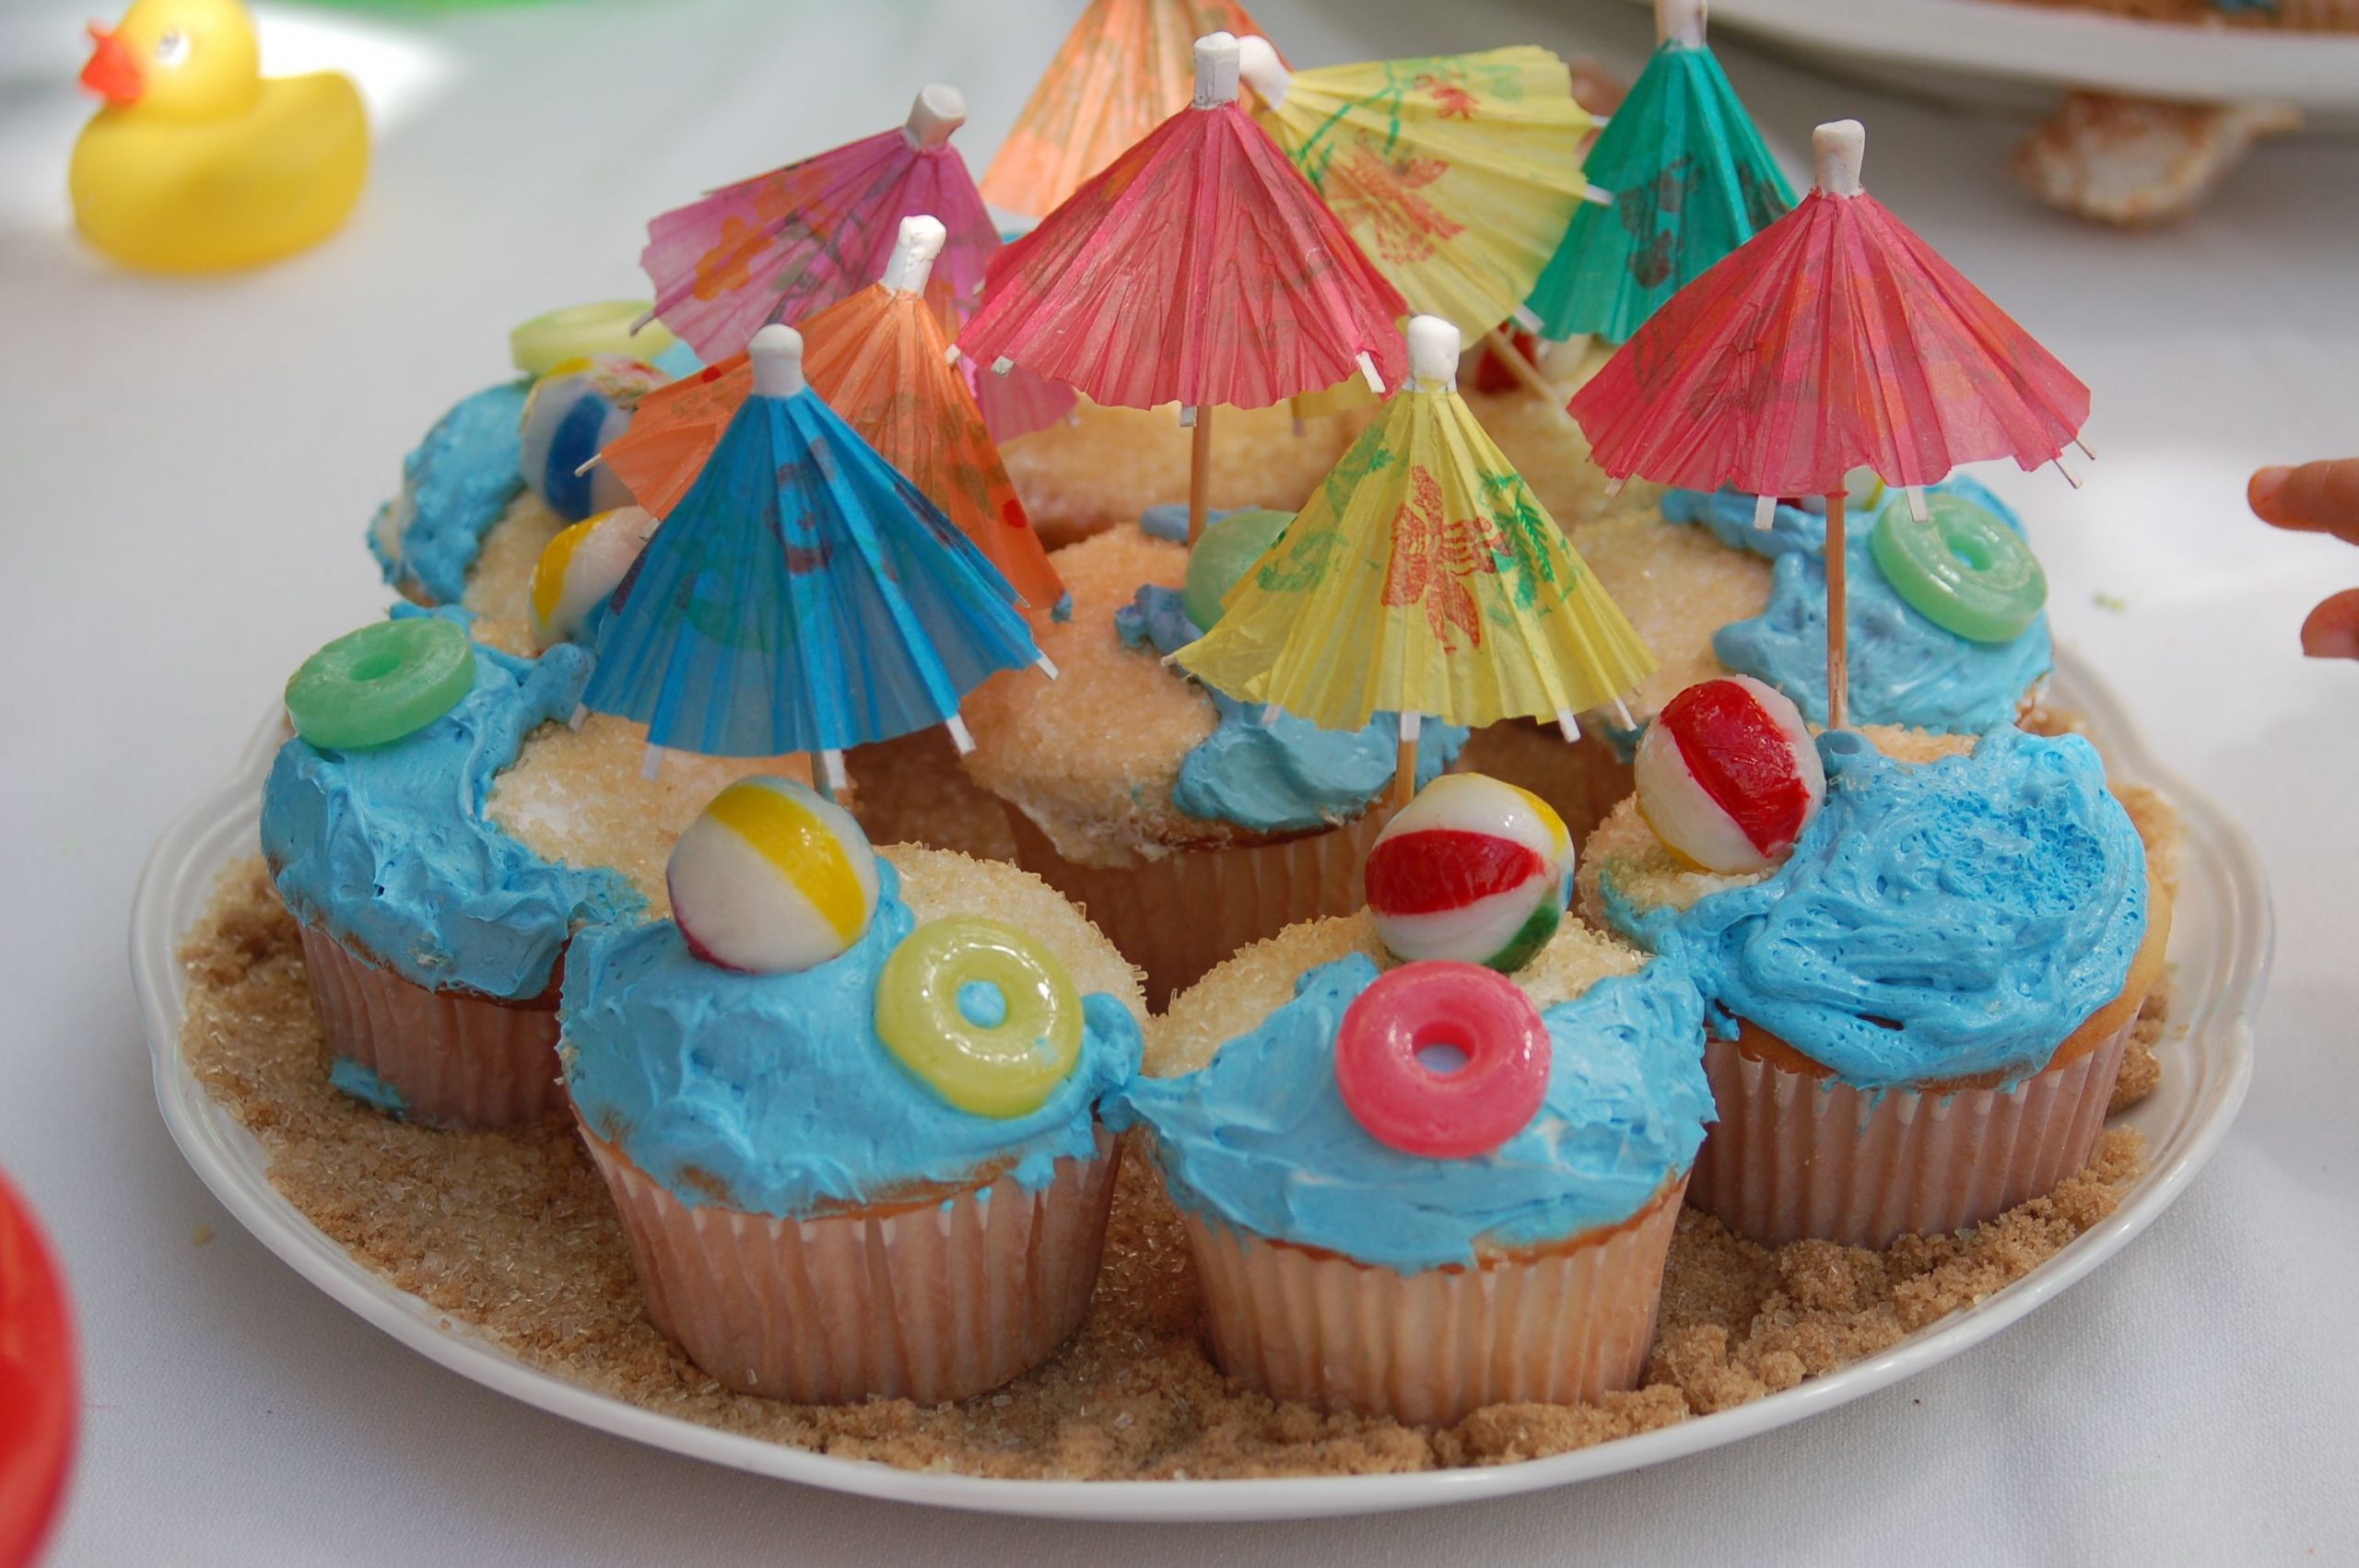 Pool Party Cupcake Ideas
 Pool Party Cupcakes cupcakes Summer cupcakes beach